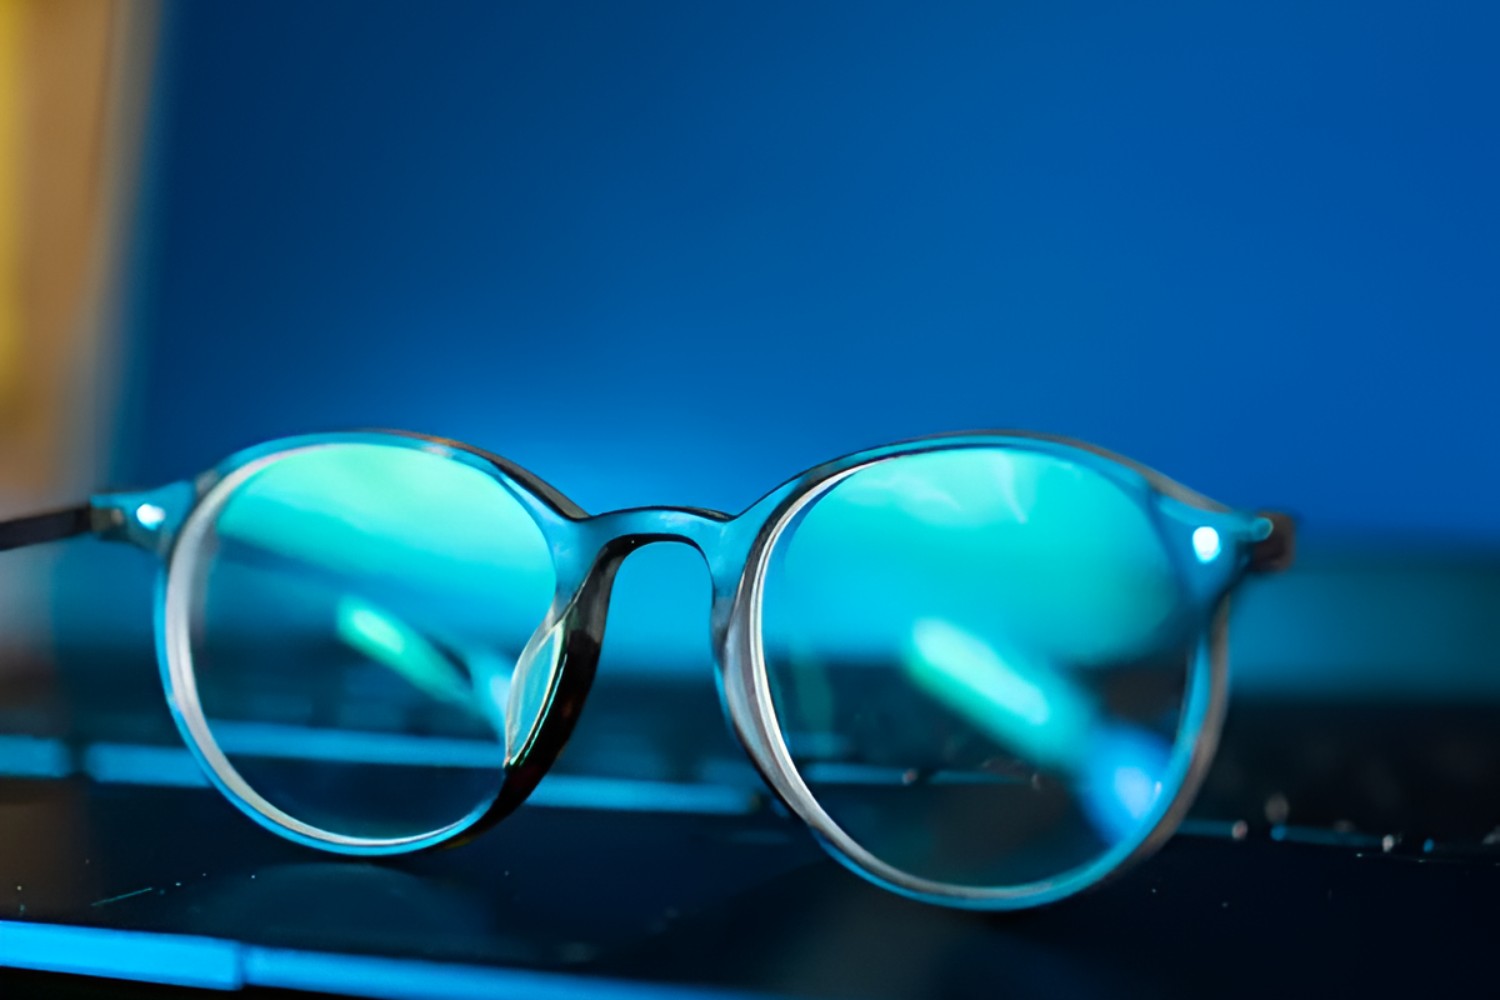 verifying-protection-methods-to-check-if-your-glasses-block-blue-light